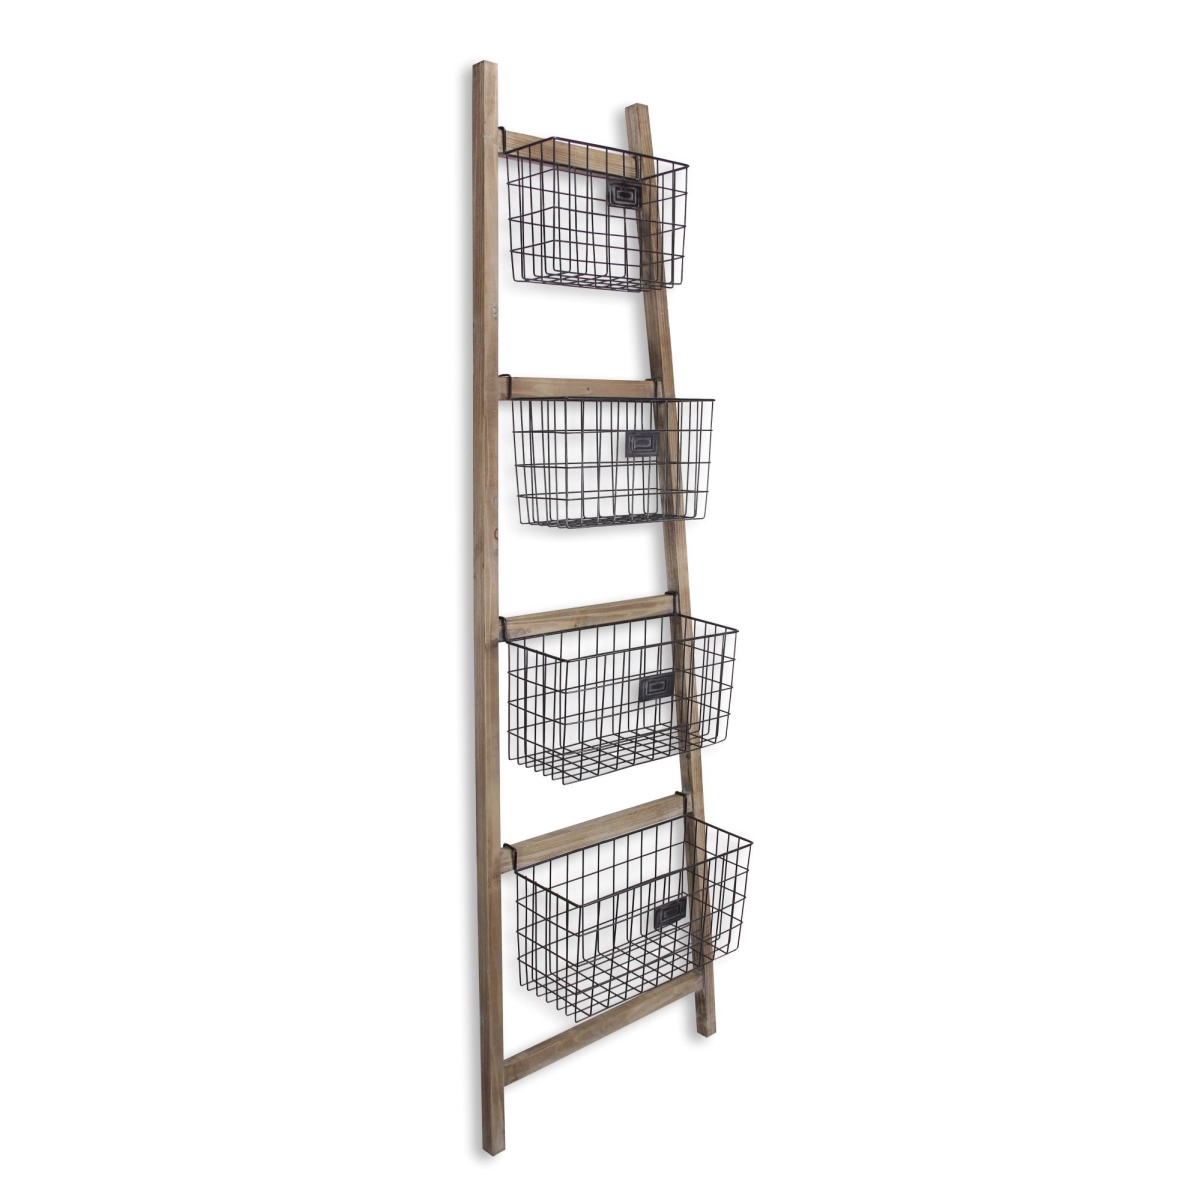 Picture of HomeRoots 399700 Wooden Storage Ladder with 4 Baskets, Brown